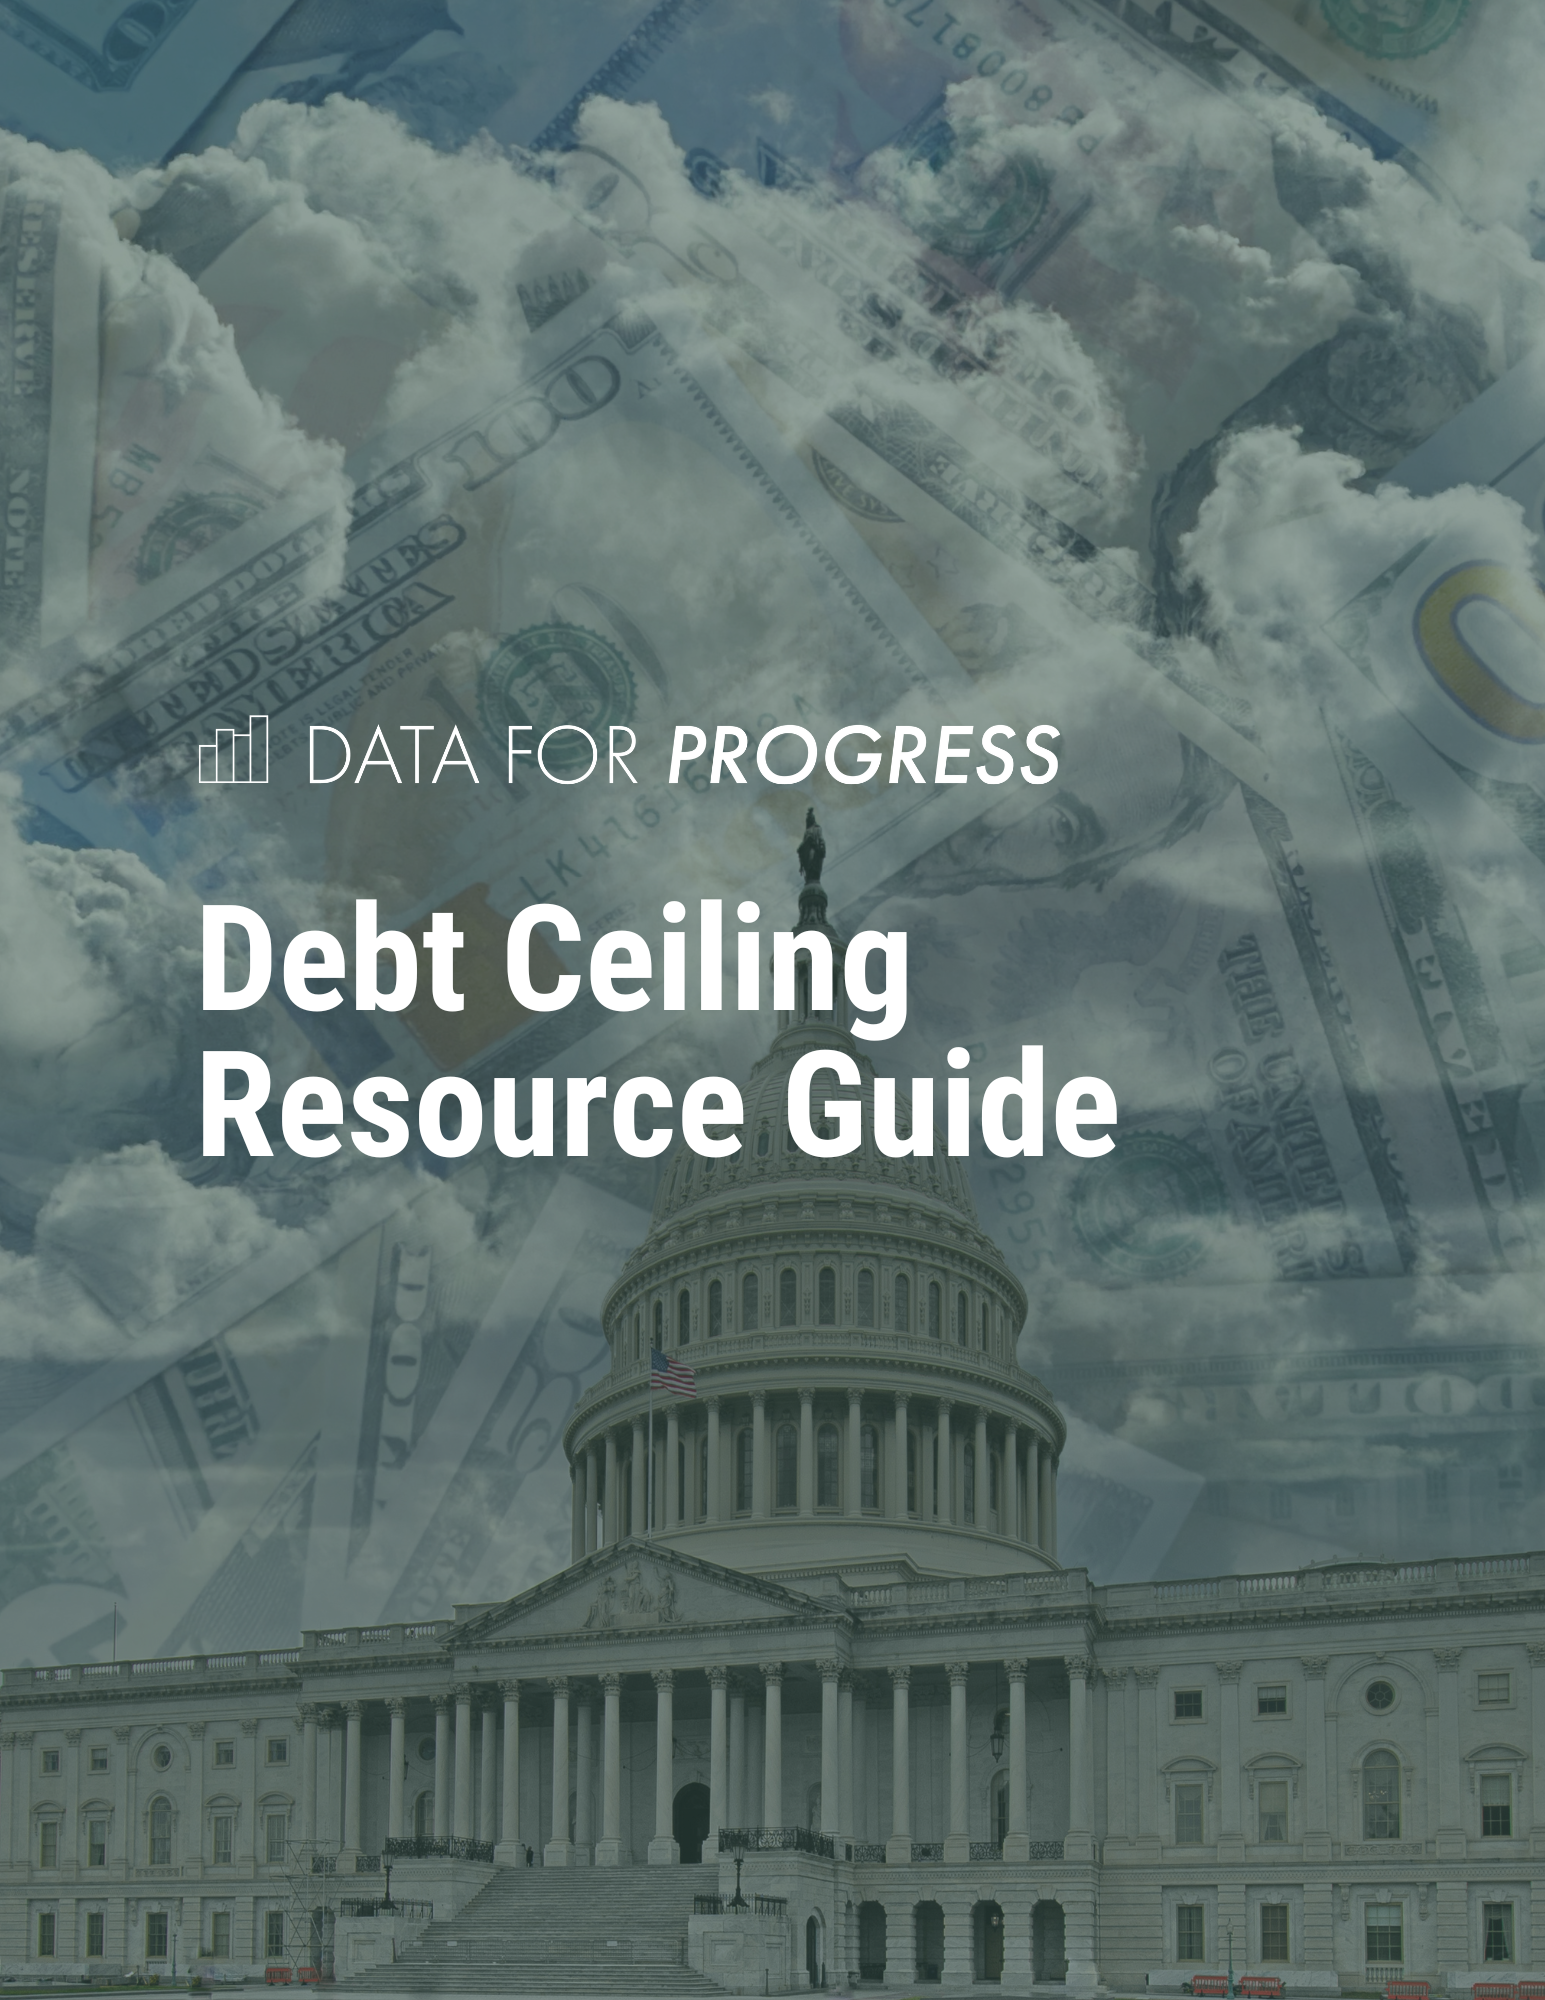 Debt Ceiling Resource Guide